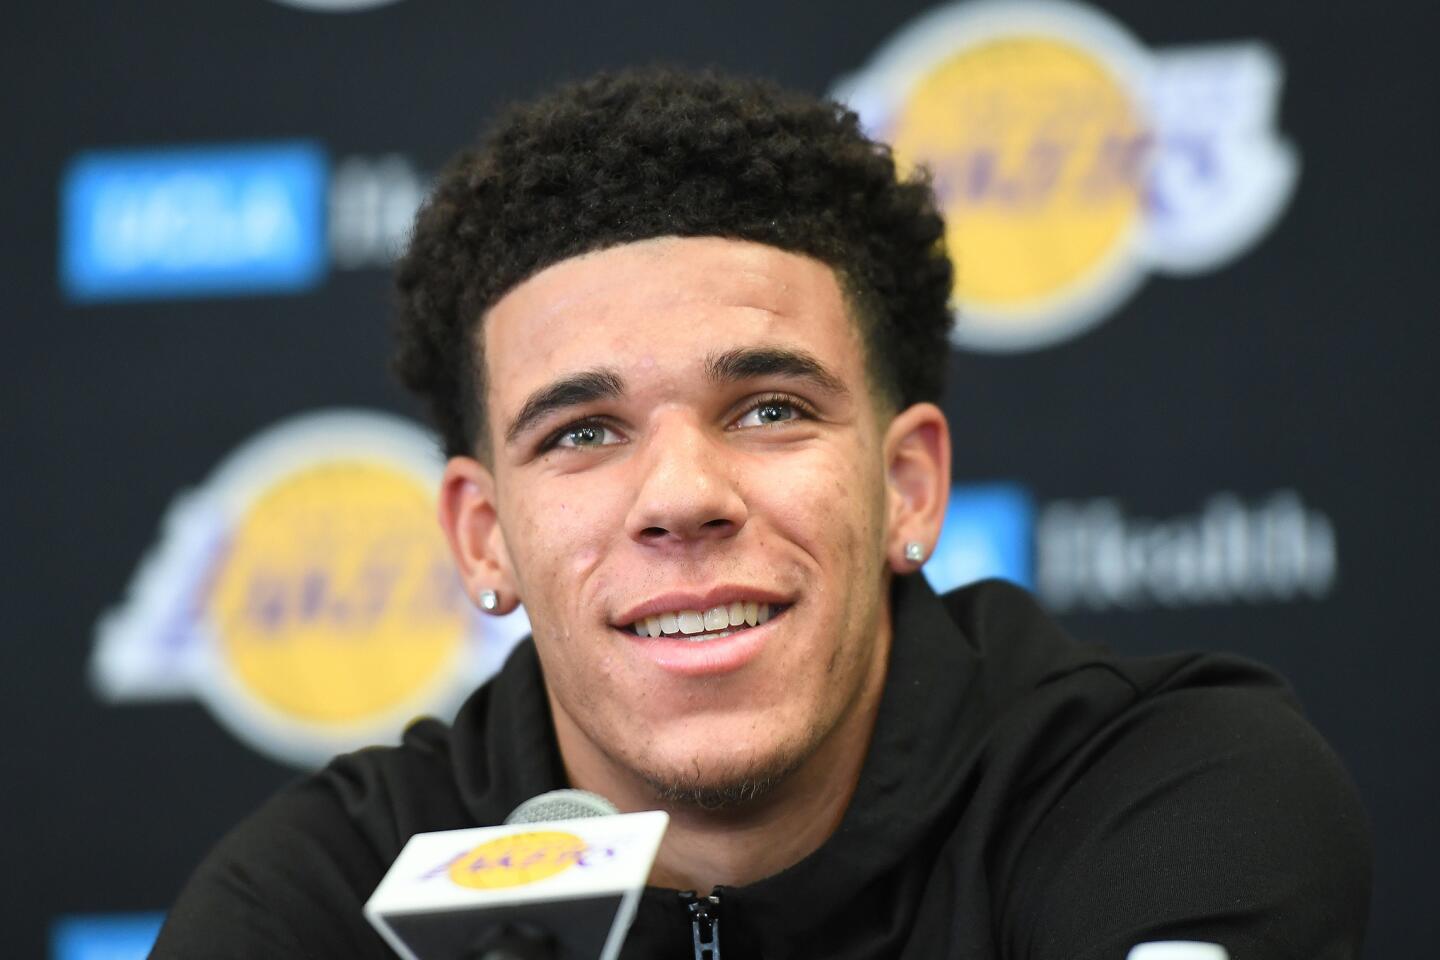 Did LiAngelo Ball just blow his final shot at playing in NBA with